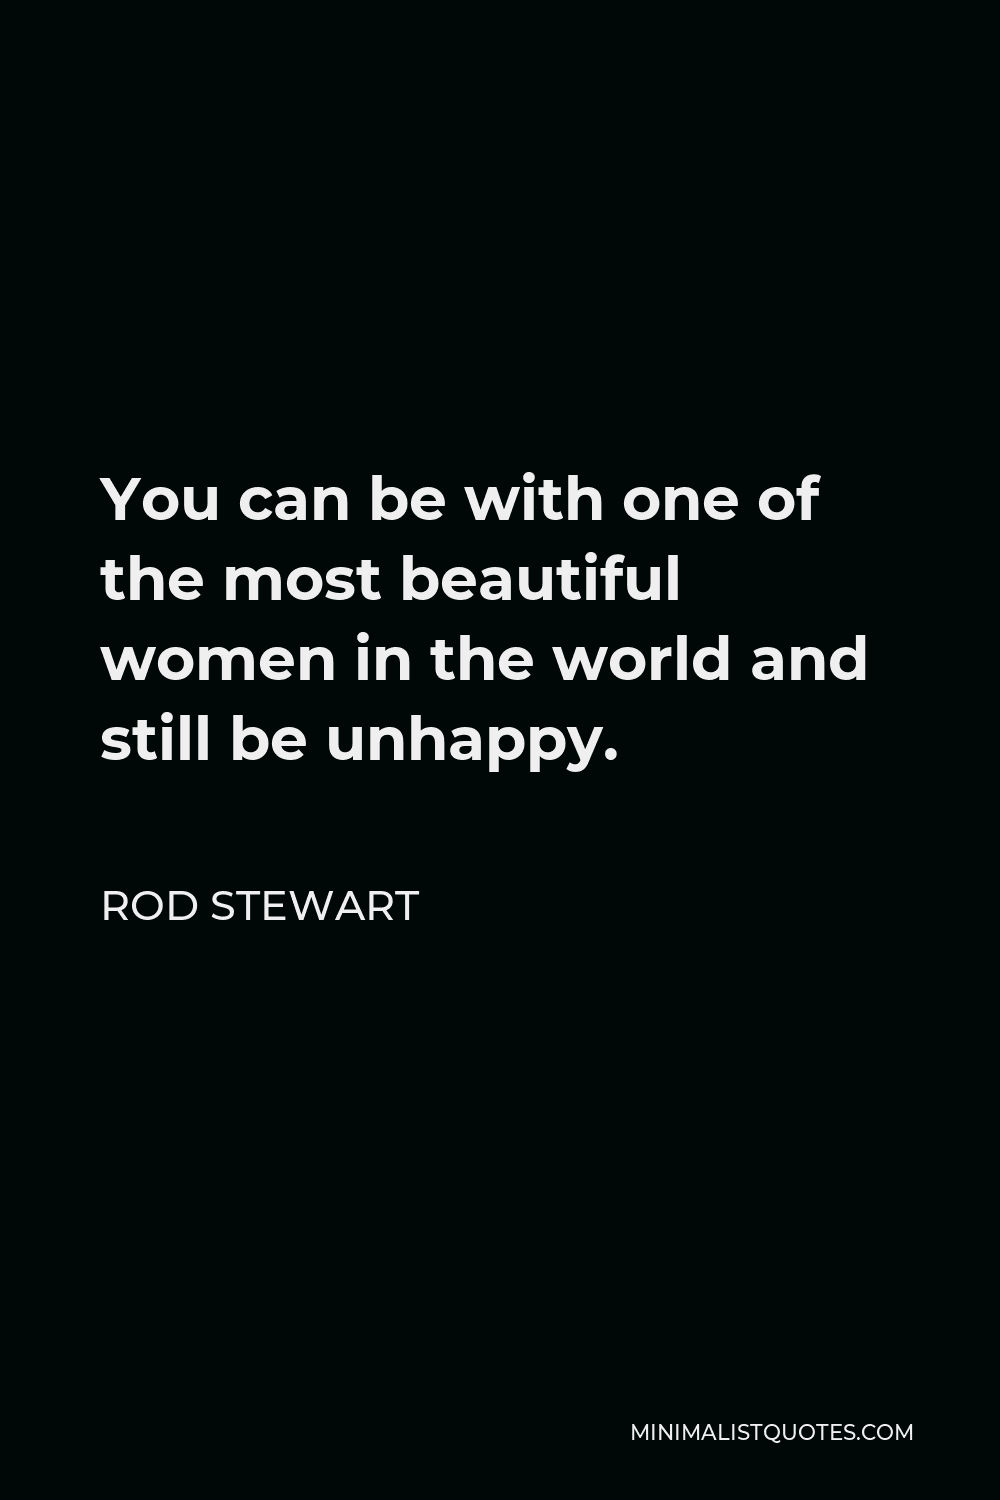 Rod Stewart Quote - You can be with one of the most beautiful women in the world and still be unhappy.